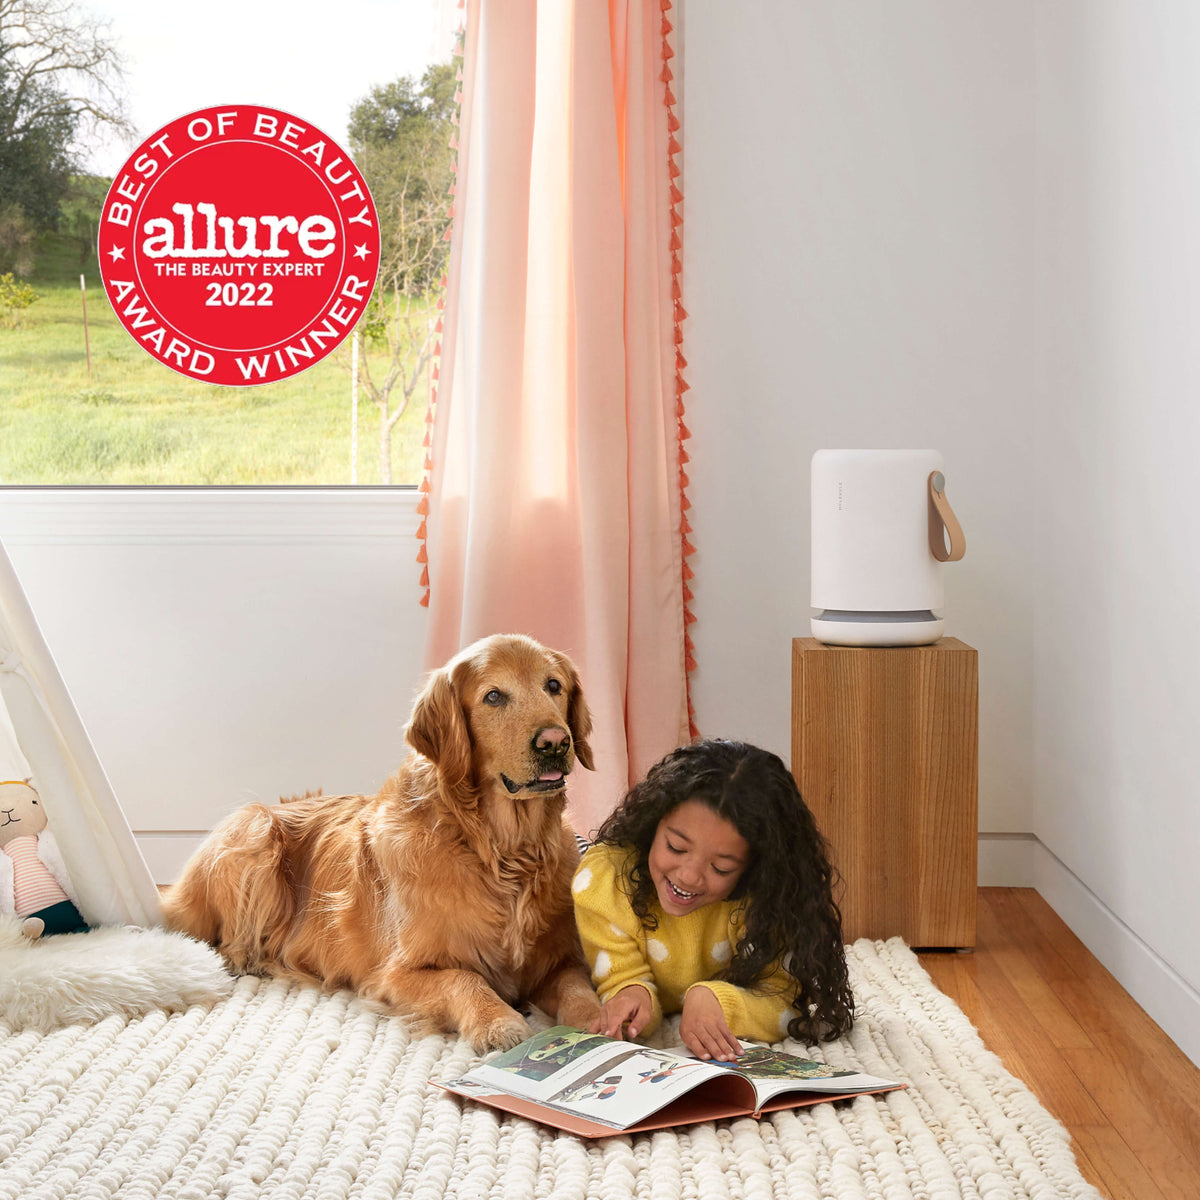 Child and dog laying on the floor reading a picture book in front of an Air Mini+ air purifier